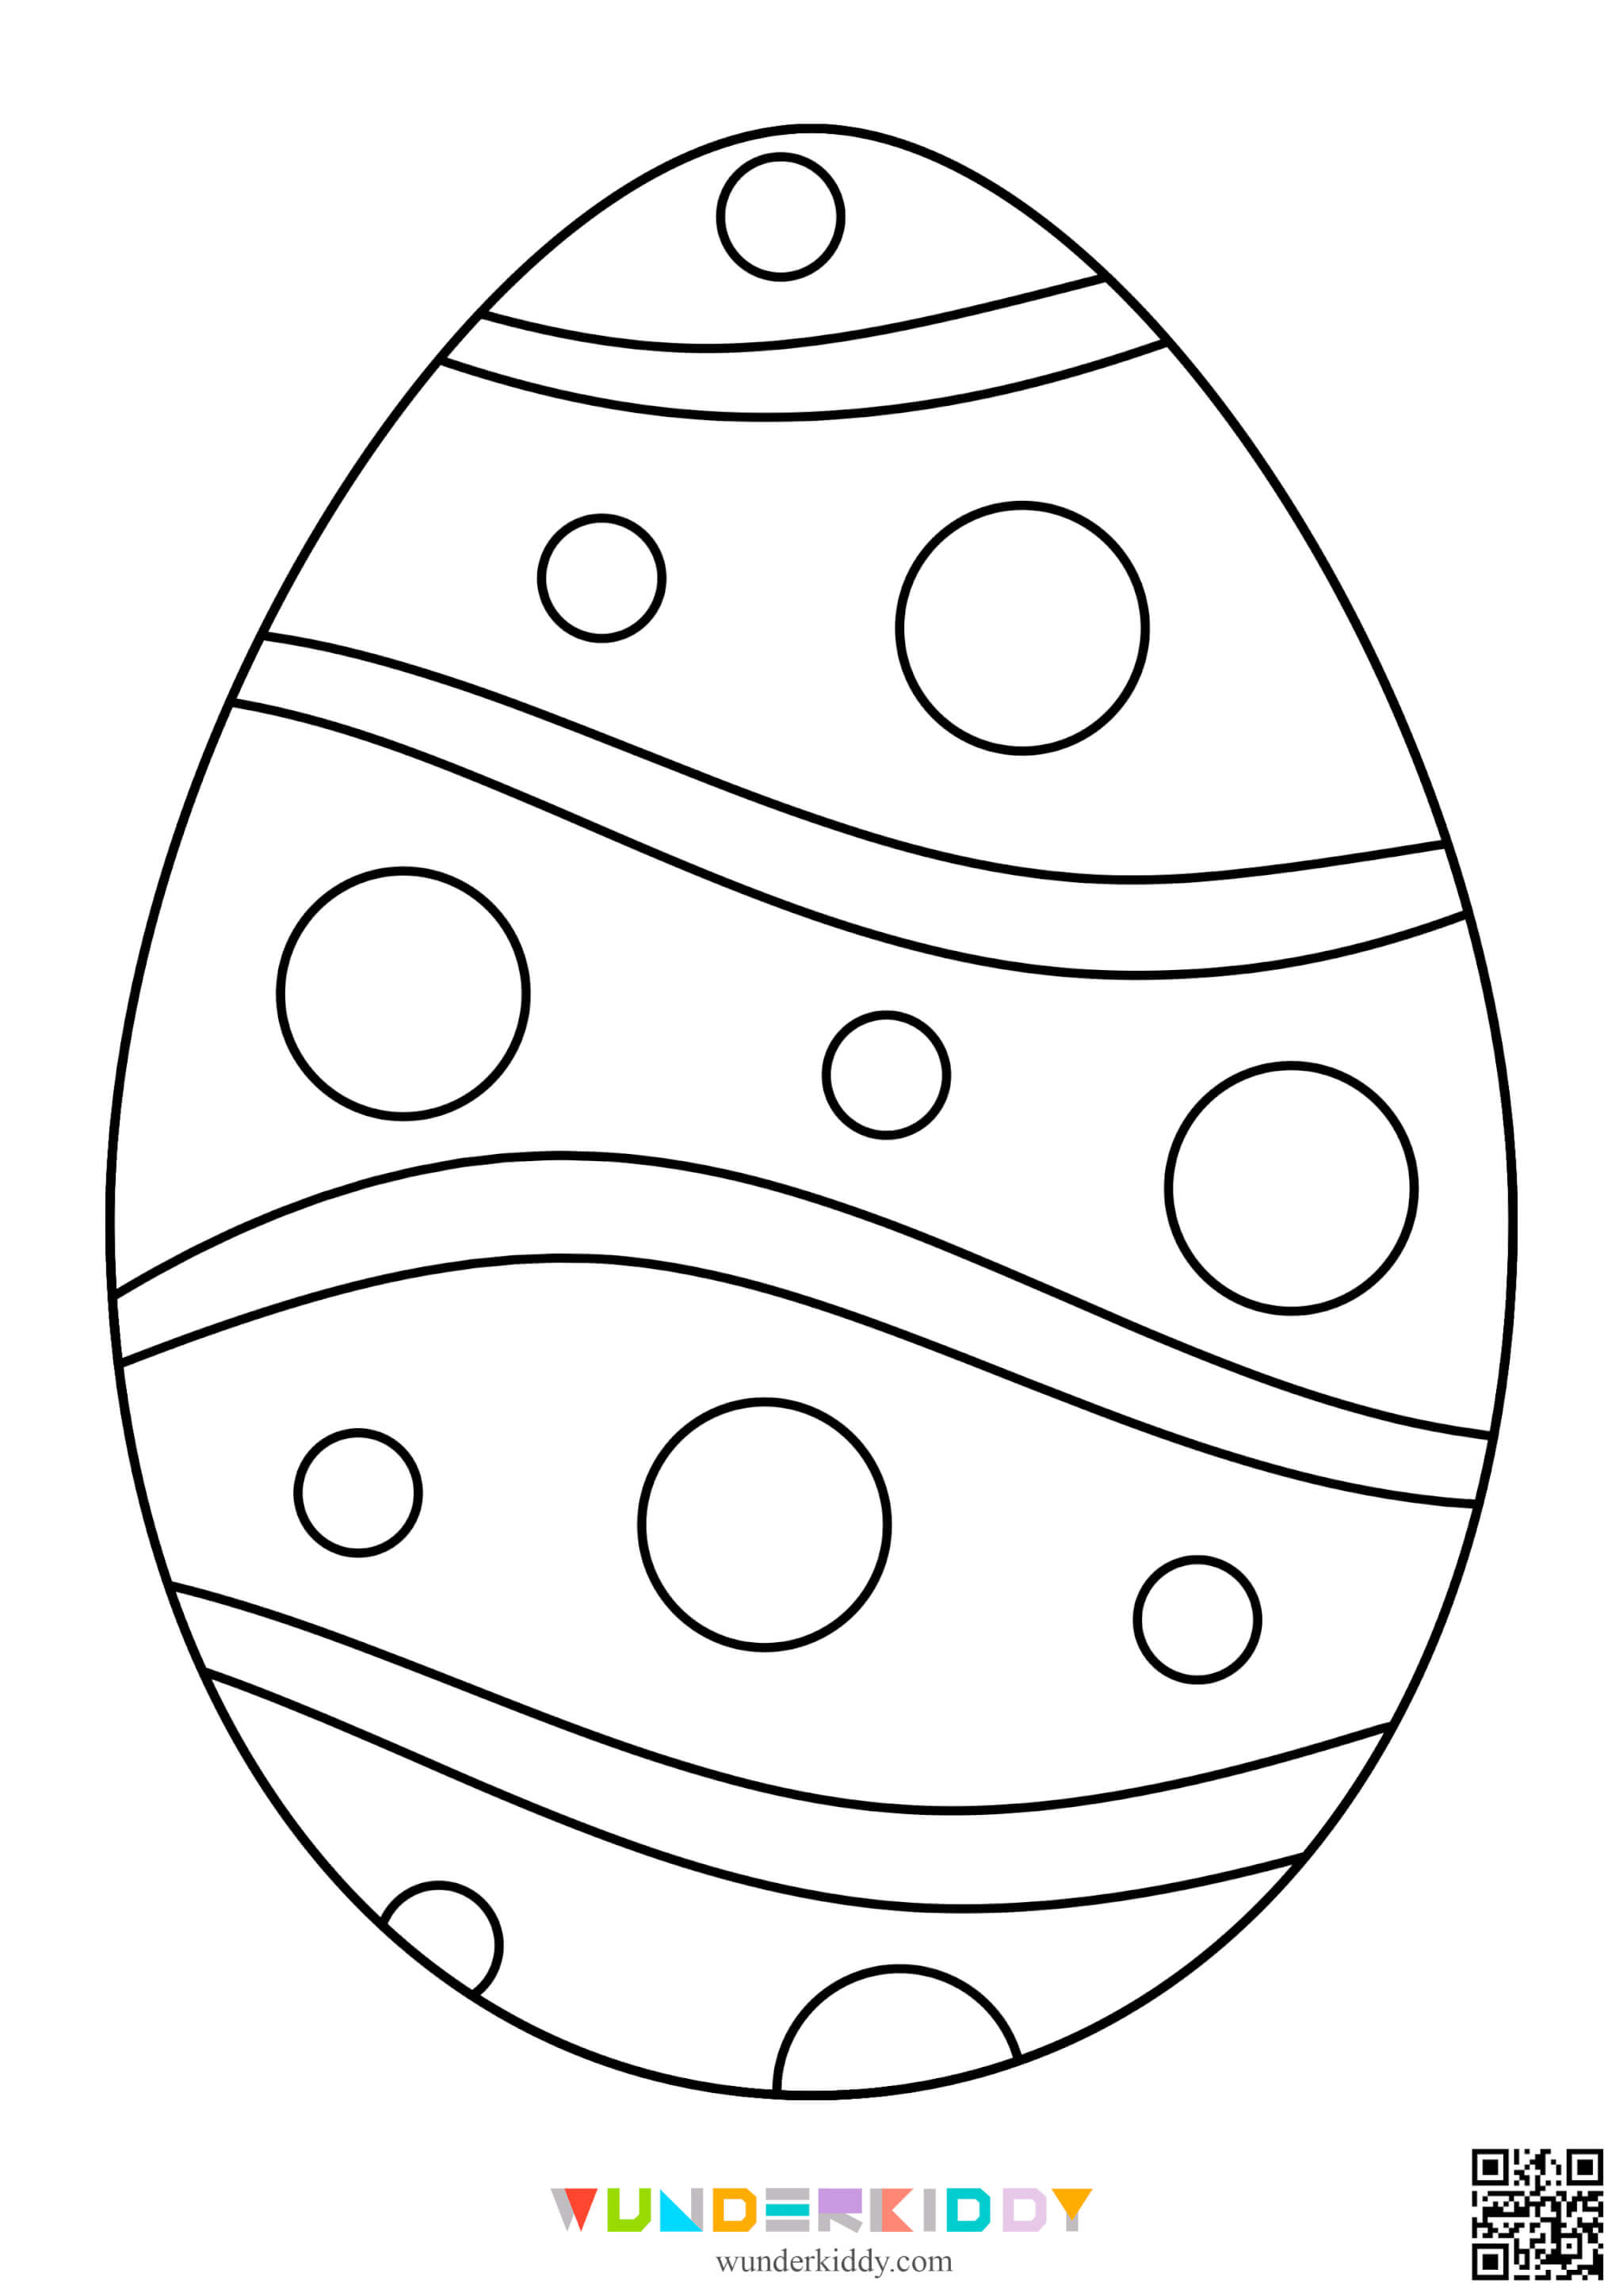 Easter Egg Template Colouring Page - Image 10